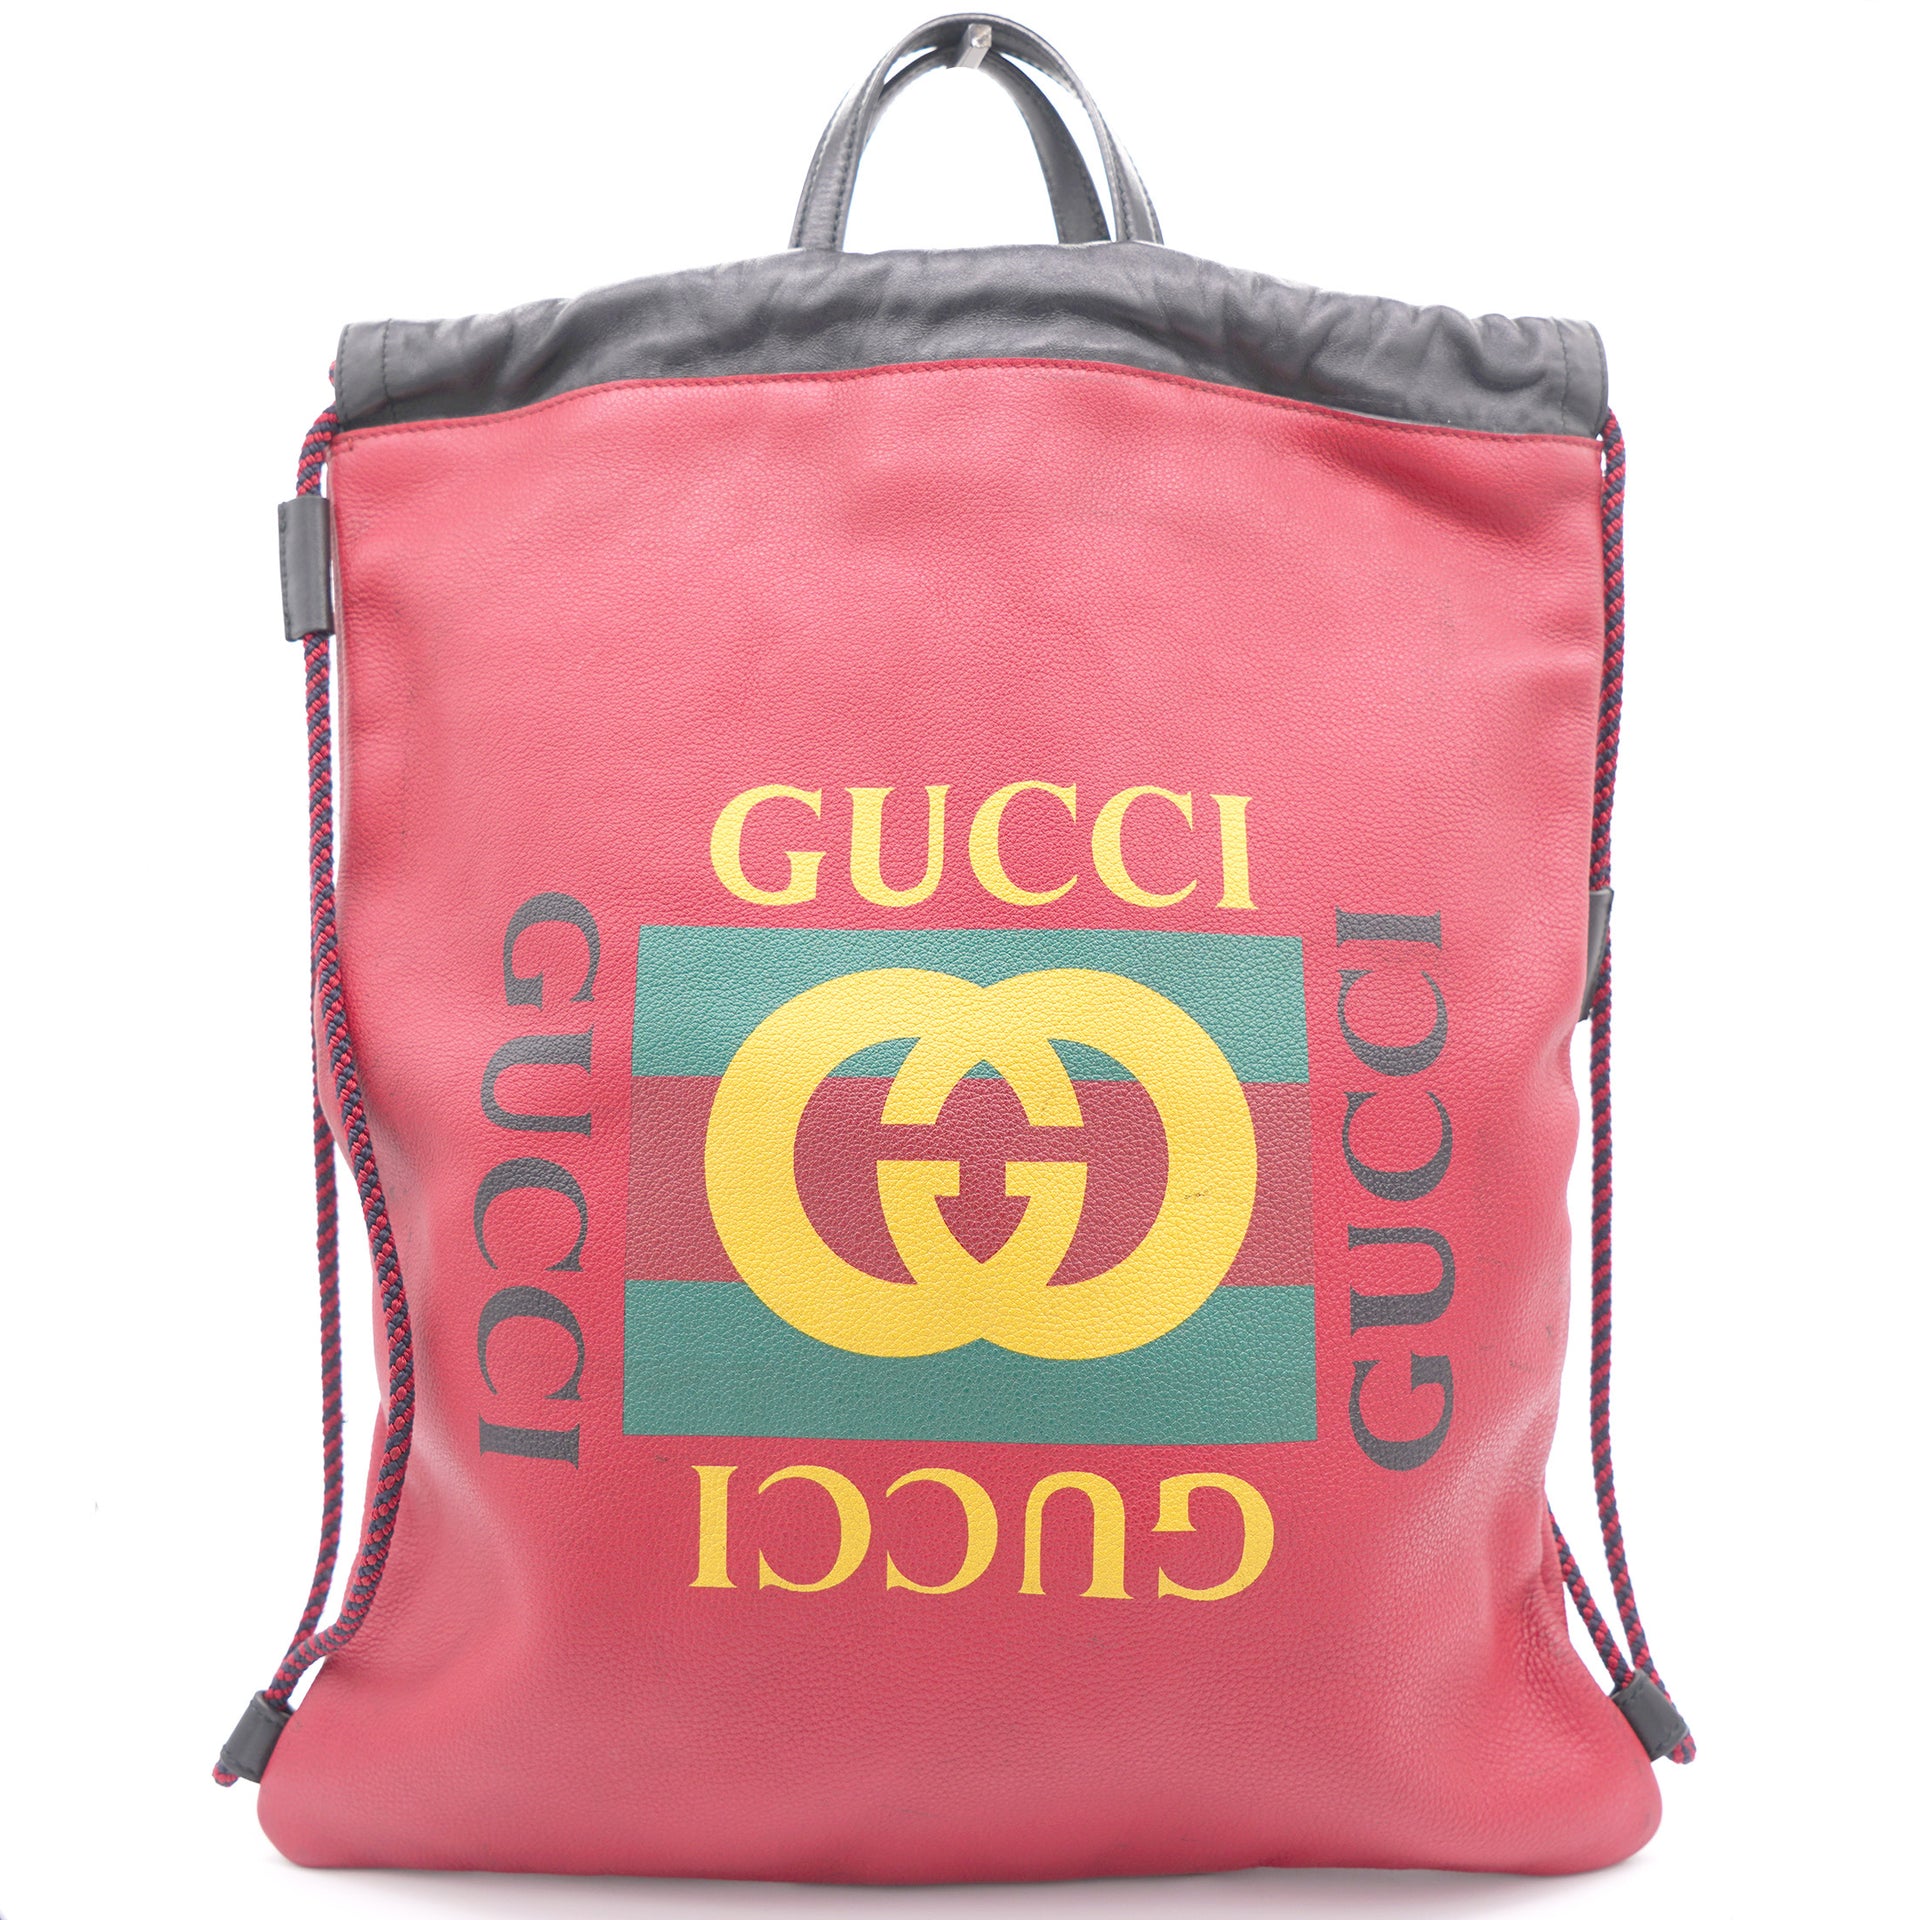 Red Leather Coco Capitan Logo Drawstring Backpack Bag